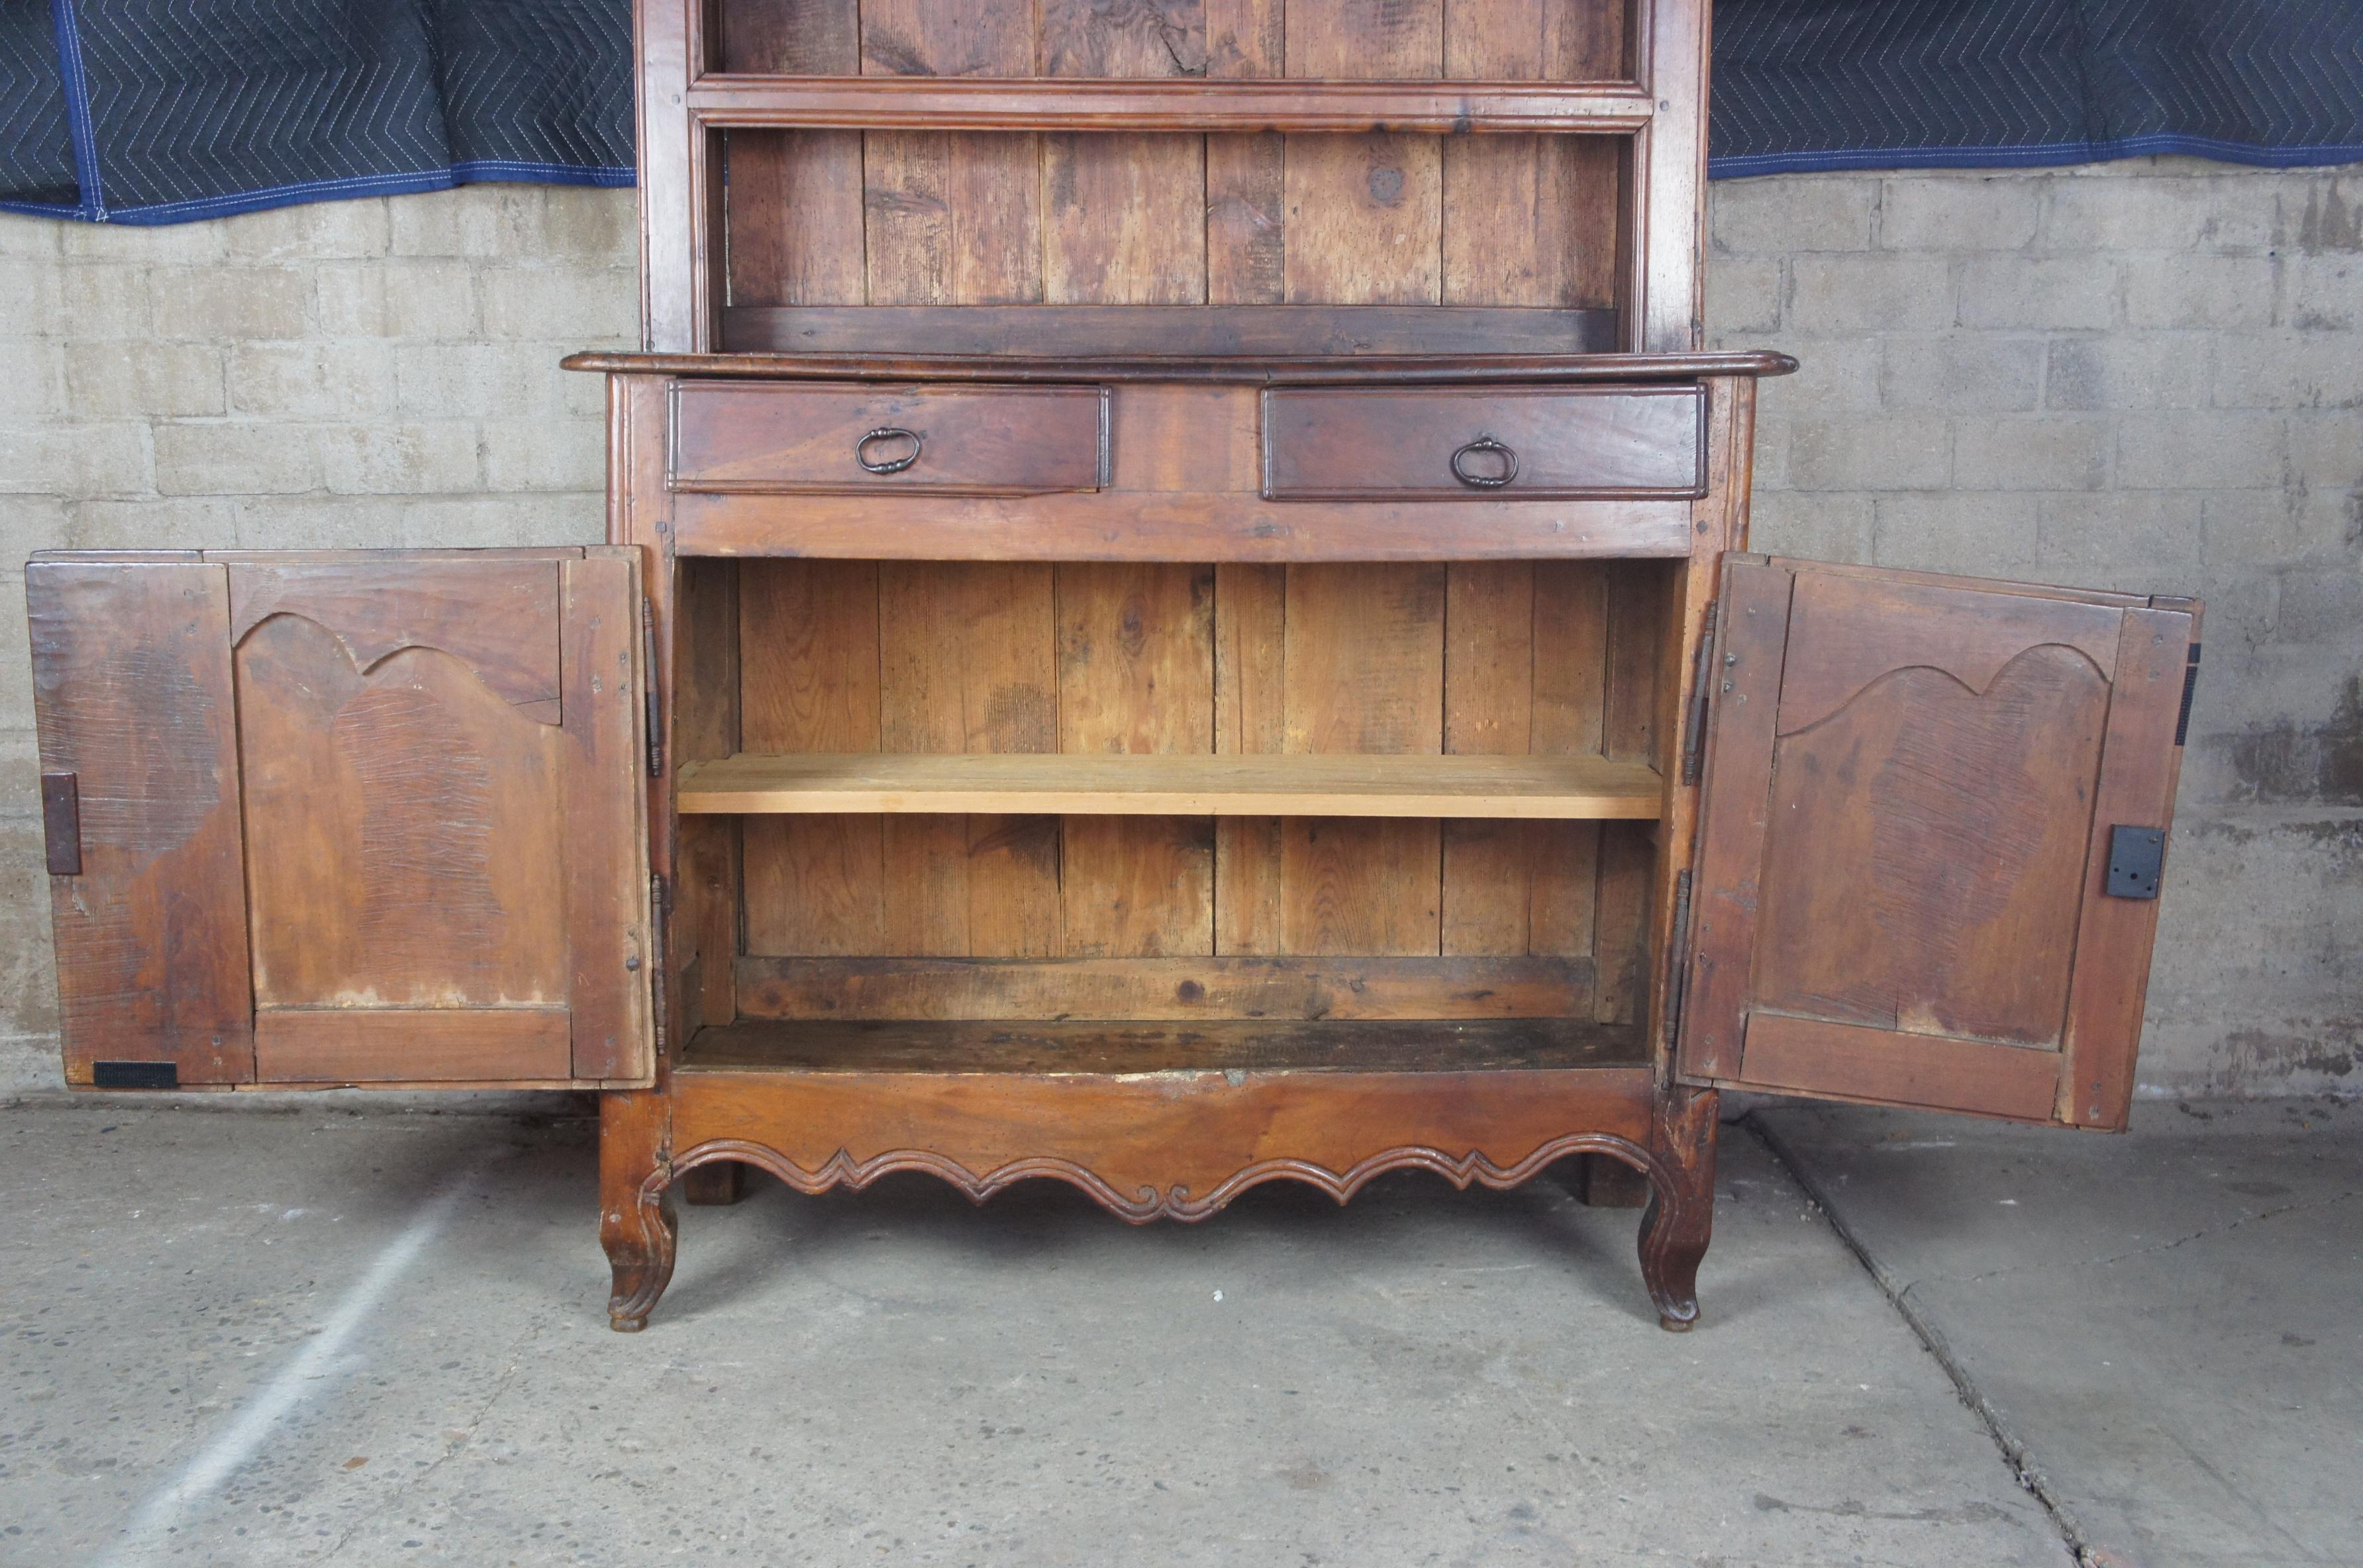 French Provincial Antique 18th century French Country Rustic Oak Cupboard China Hutch Sideboard